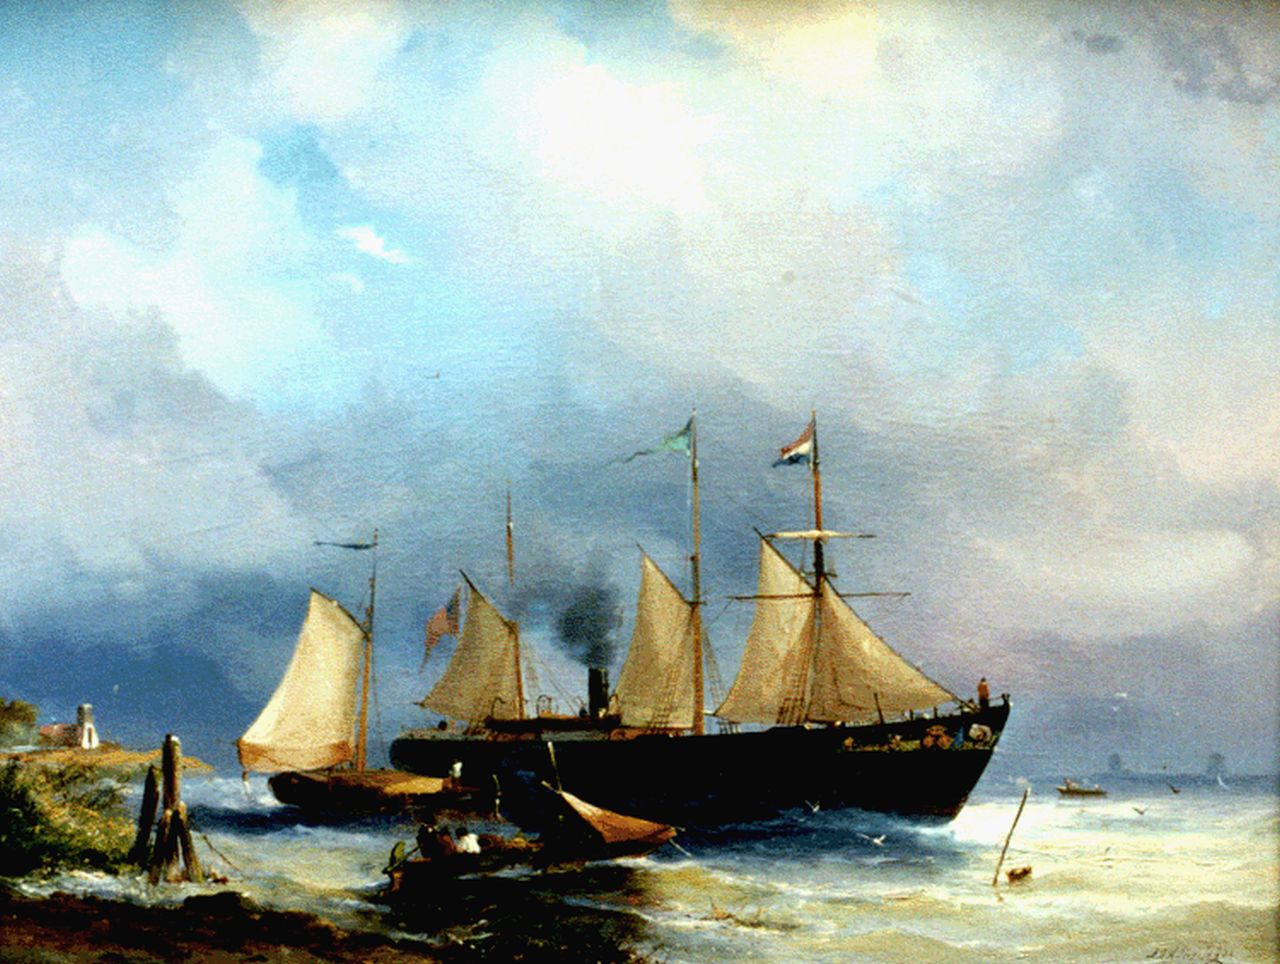 Hilleveld A.D.  | Adrianus David Hilleveld, Shipping setting out, oil on canvas 47.9 x 63.2 cm, signed l.r. and dated '62